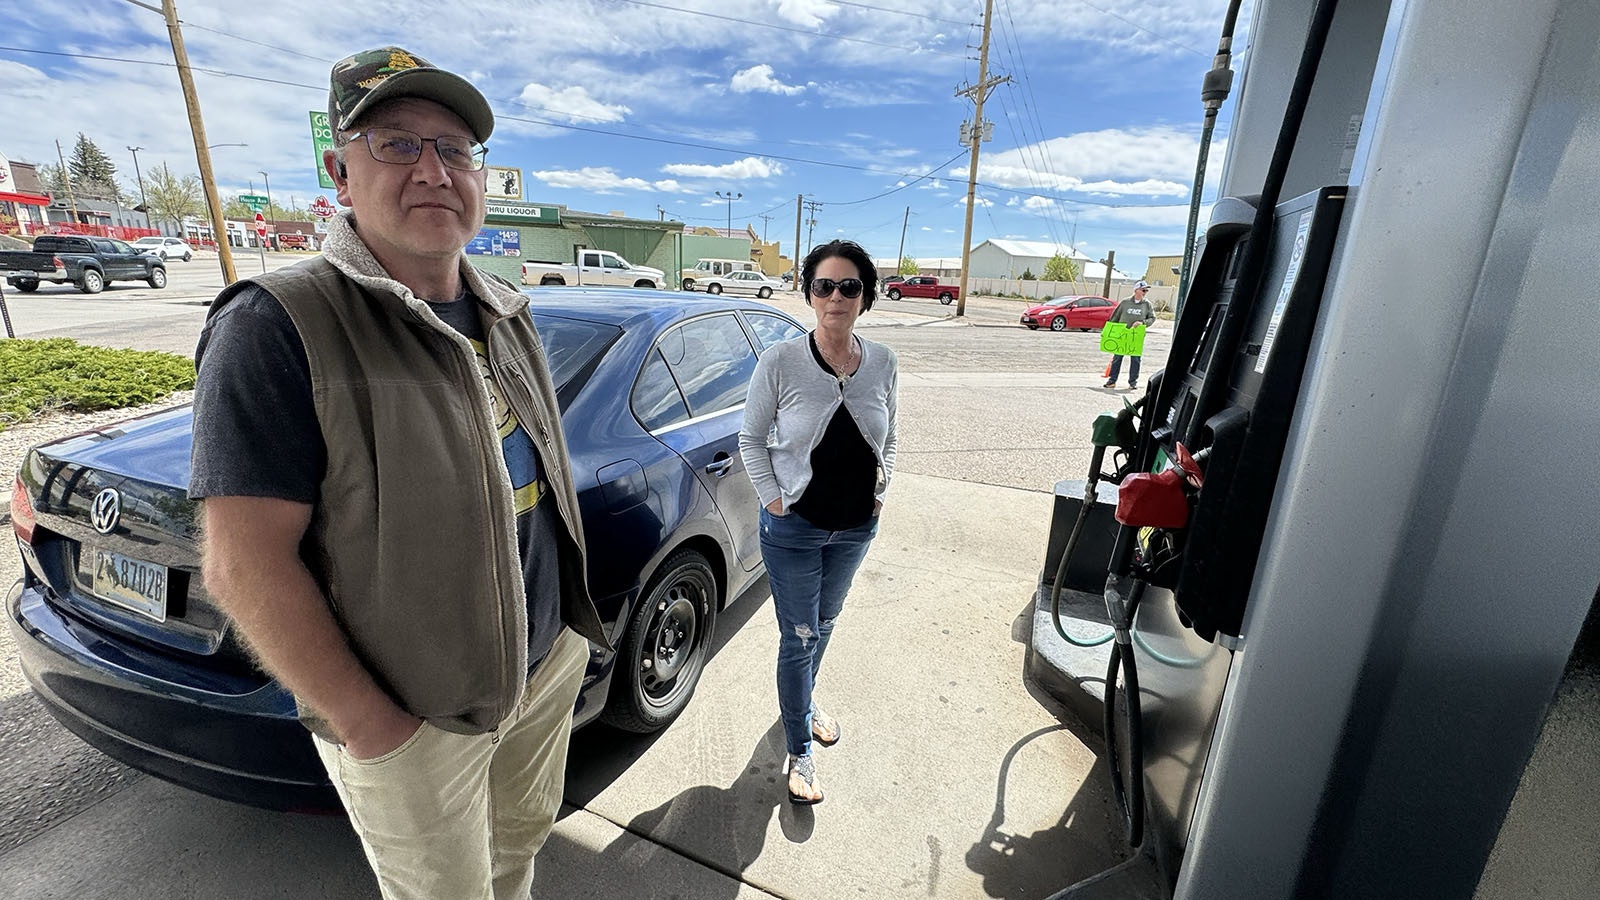 Bill Strey, left, and Teresa Strey, are strongly opposed to Bidenomics. “I think he is one of the worst presidents we’ve ever had. He’s dishonest, senile, panders to special interest groups and to a two-tier system of justice,” Bill Strey said. “Energy equals prosperity to a country.”